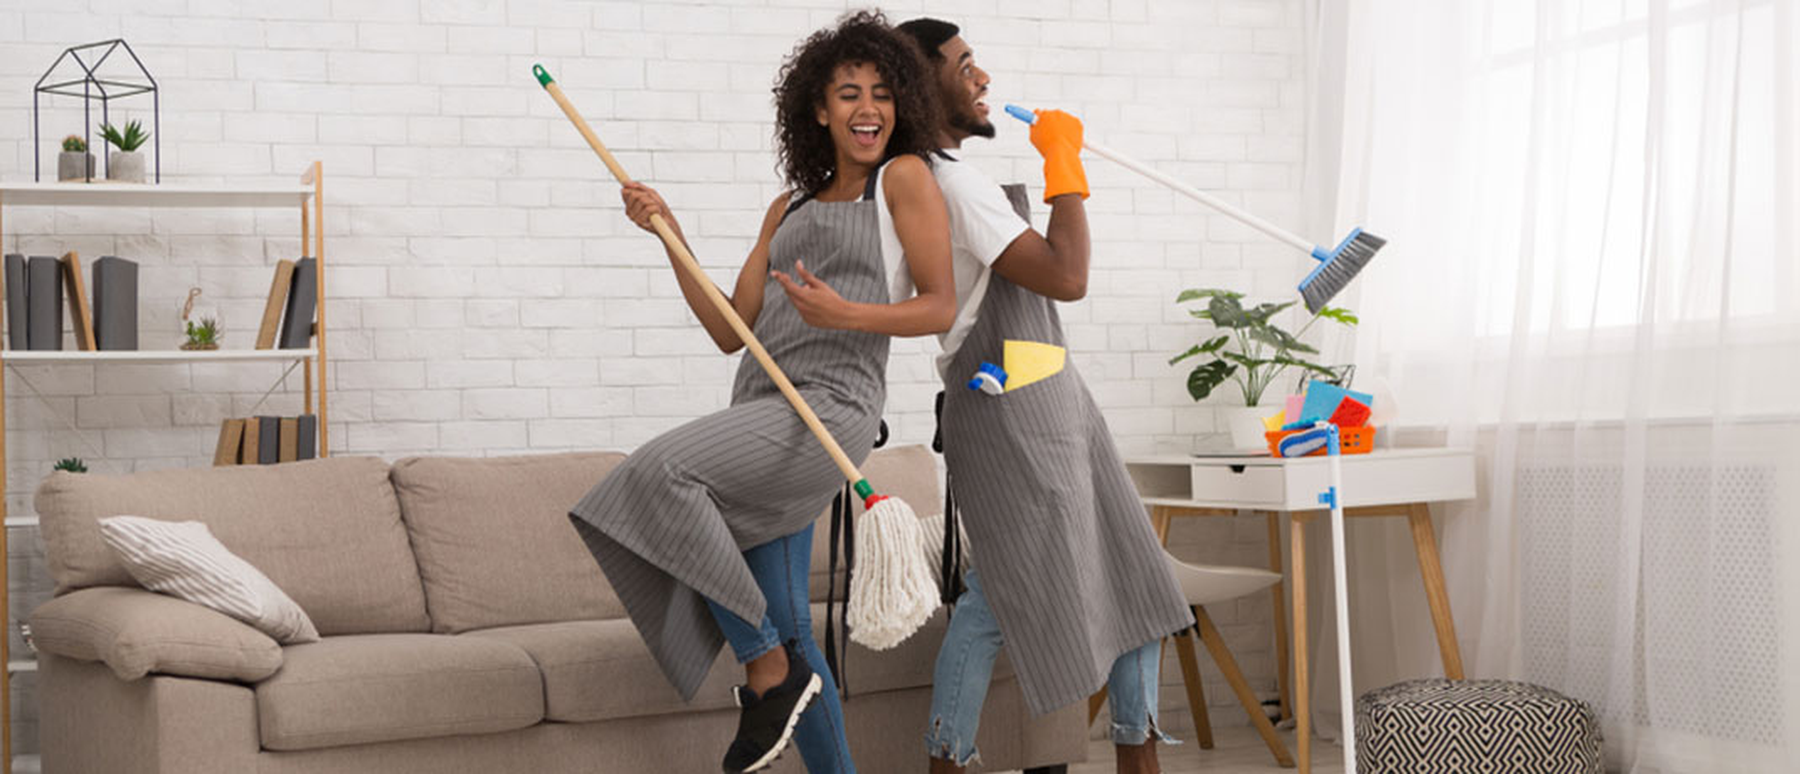 Dust Off Your Home with These Top Deals on Cleaning Supplies